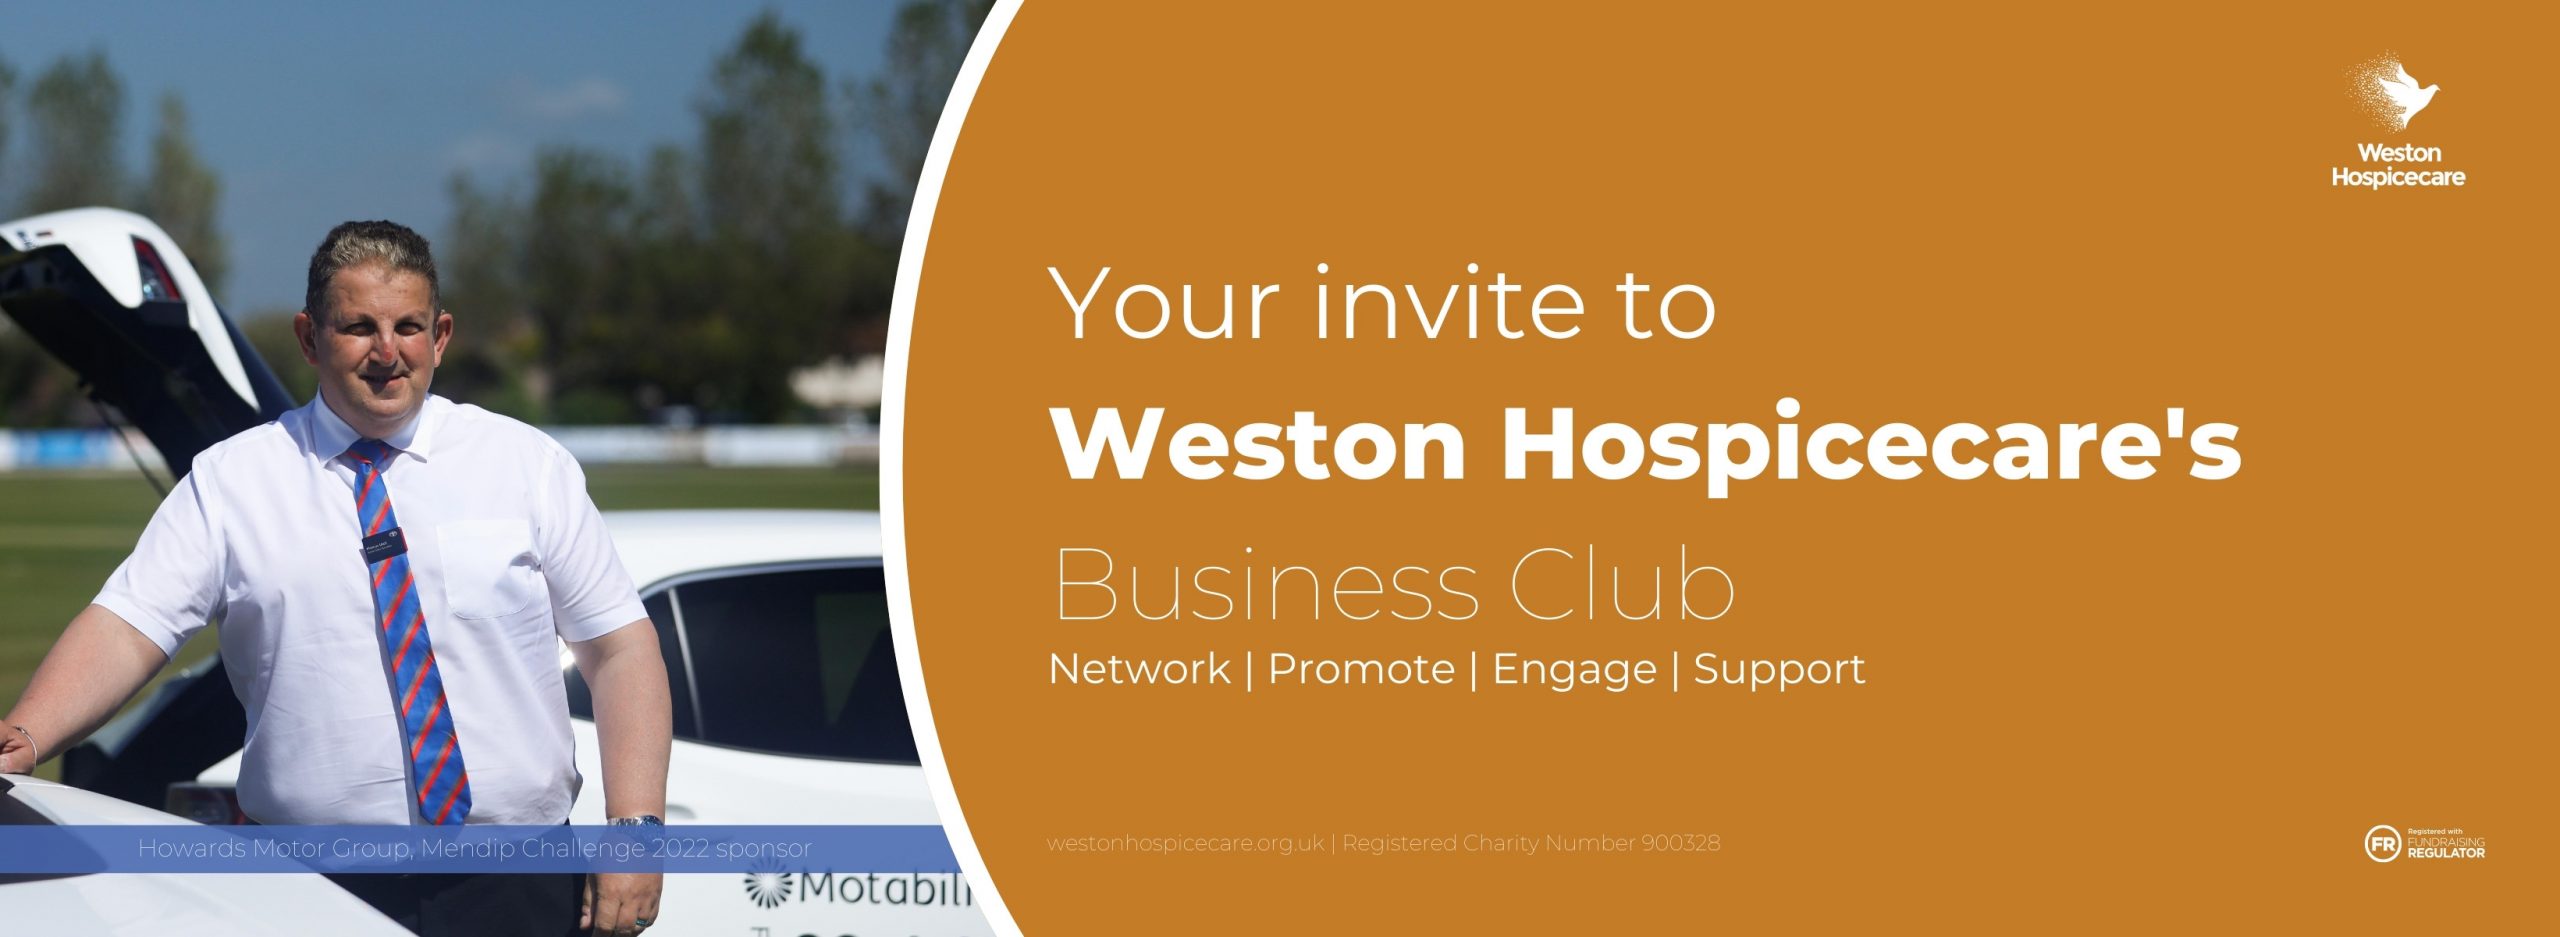 Invitation to businesses to join business club. Pictured is a representative from corporate partner Howard's Motor Group.